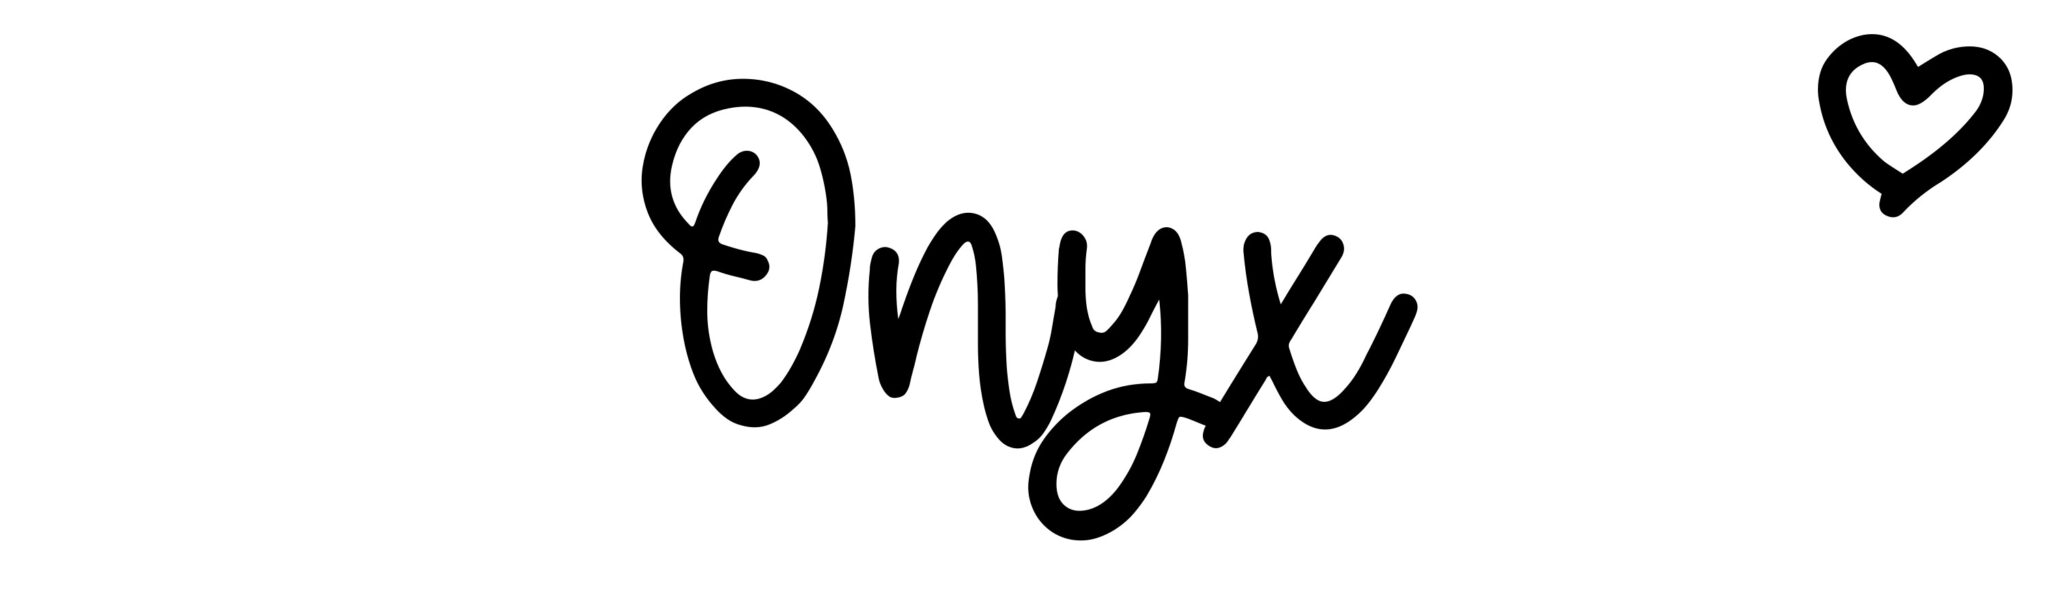 onyx name meaning